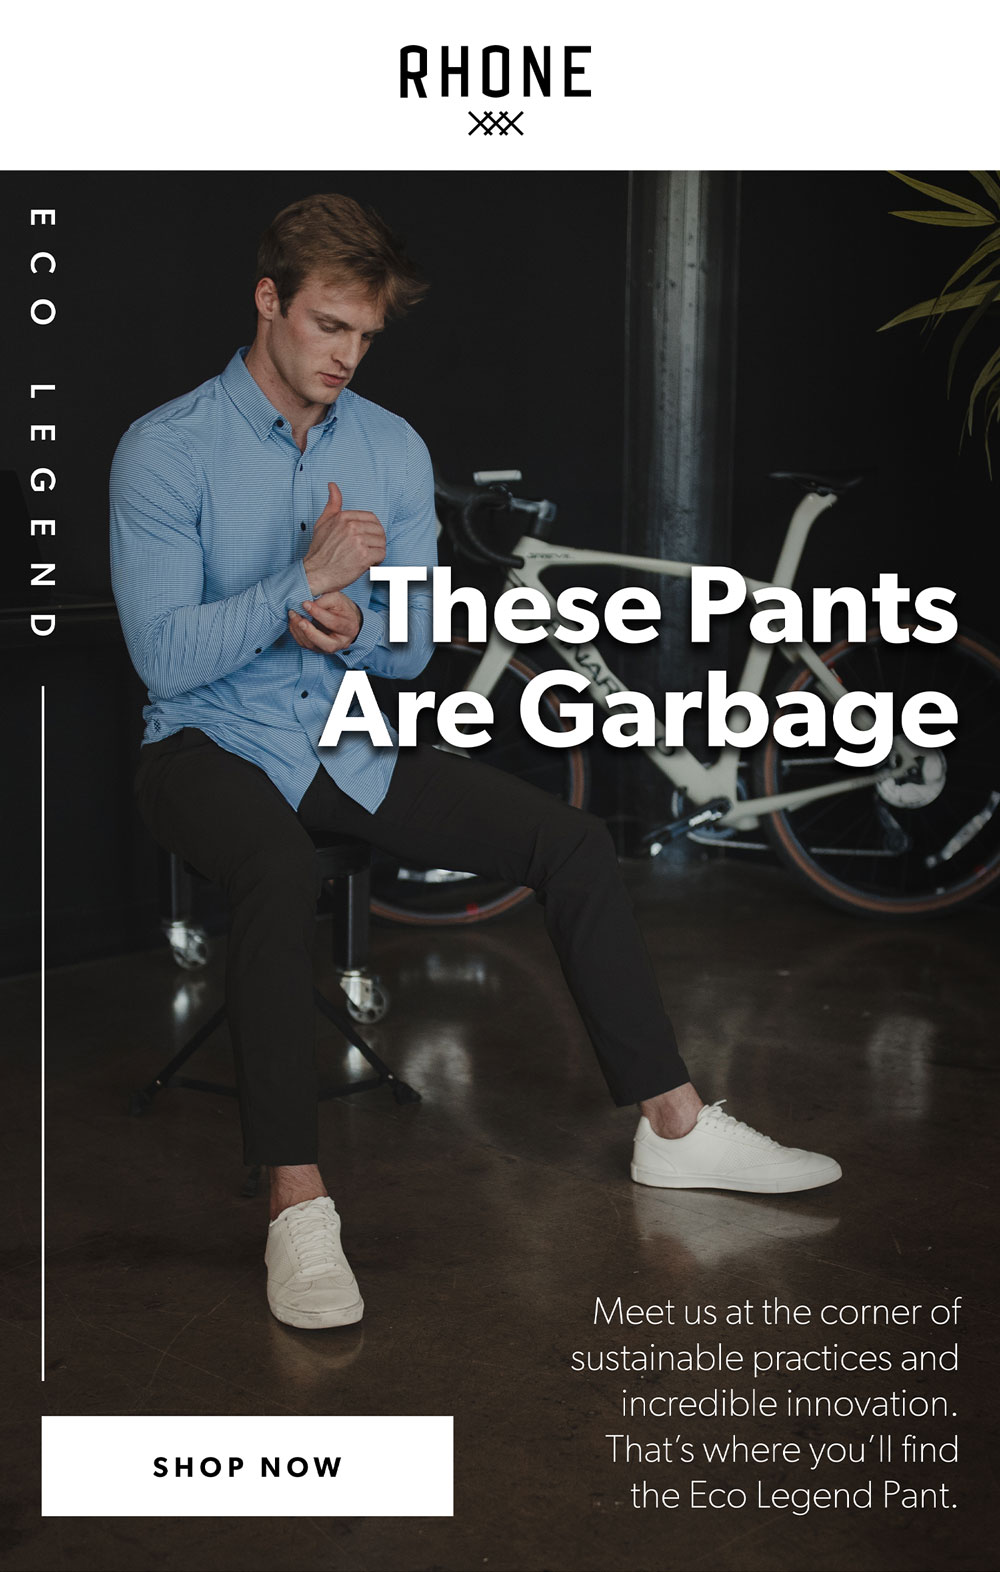 These Pants Are Garbage